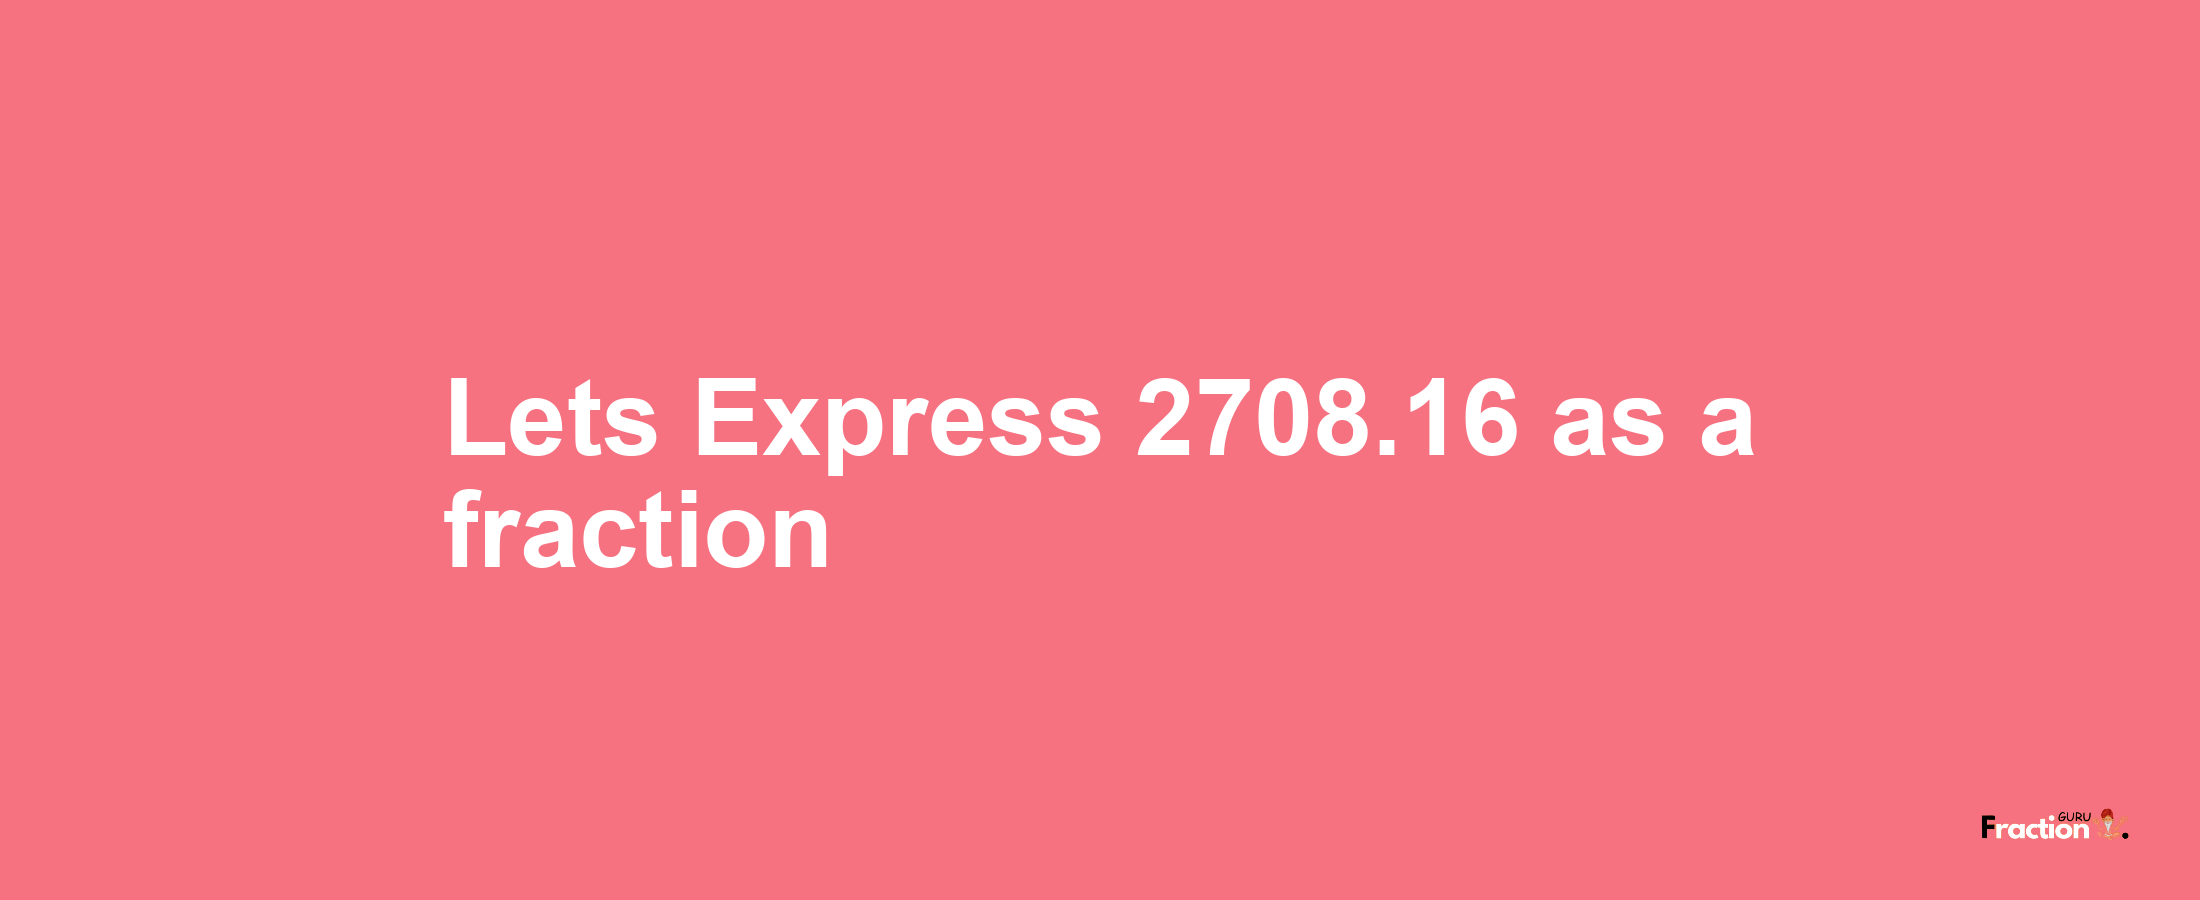 Lets Express 2708.16 as afraction